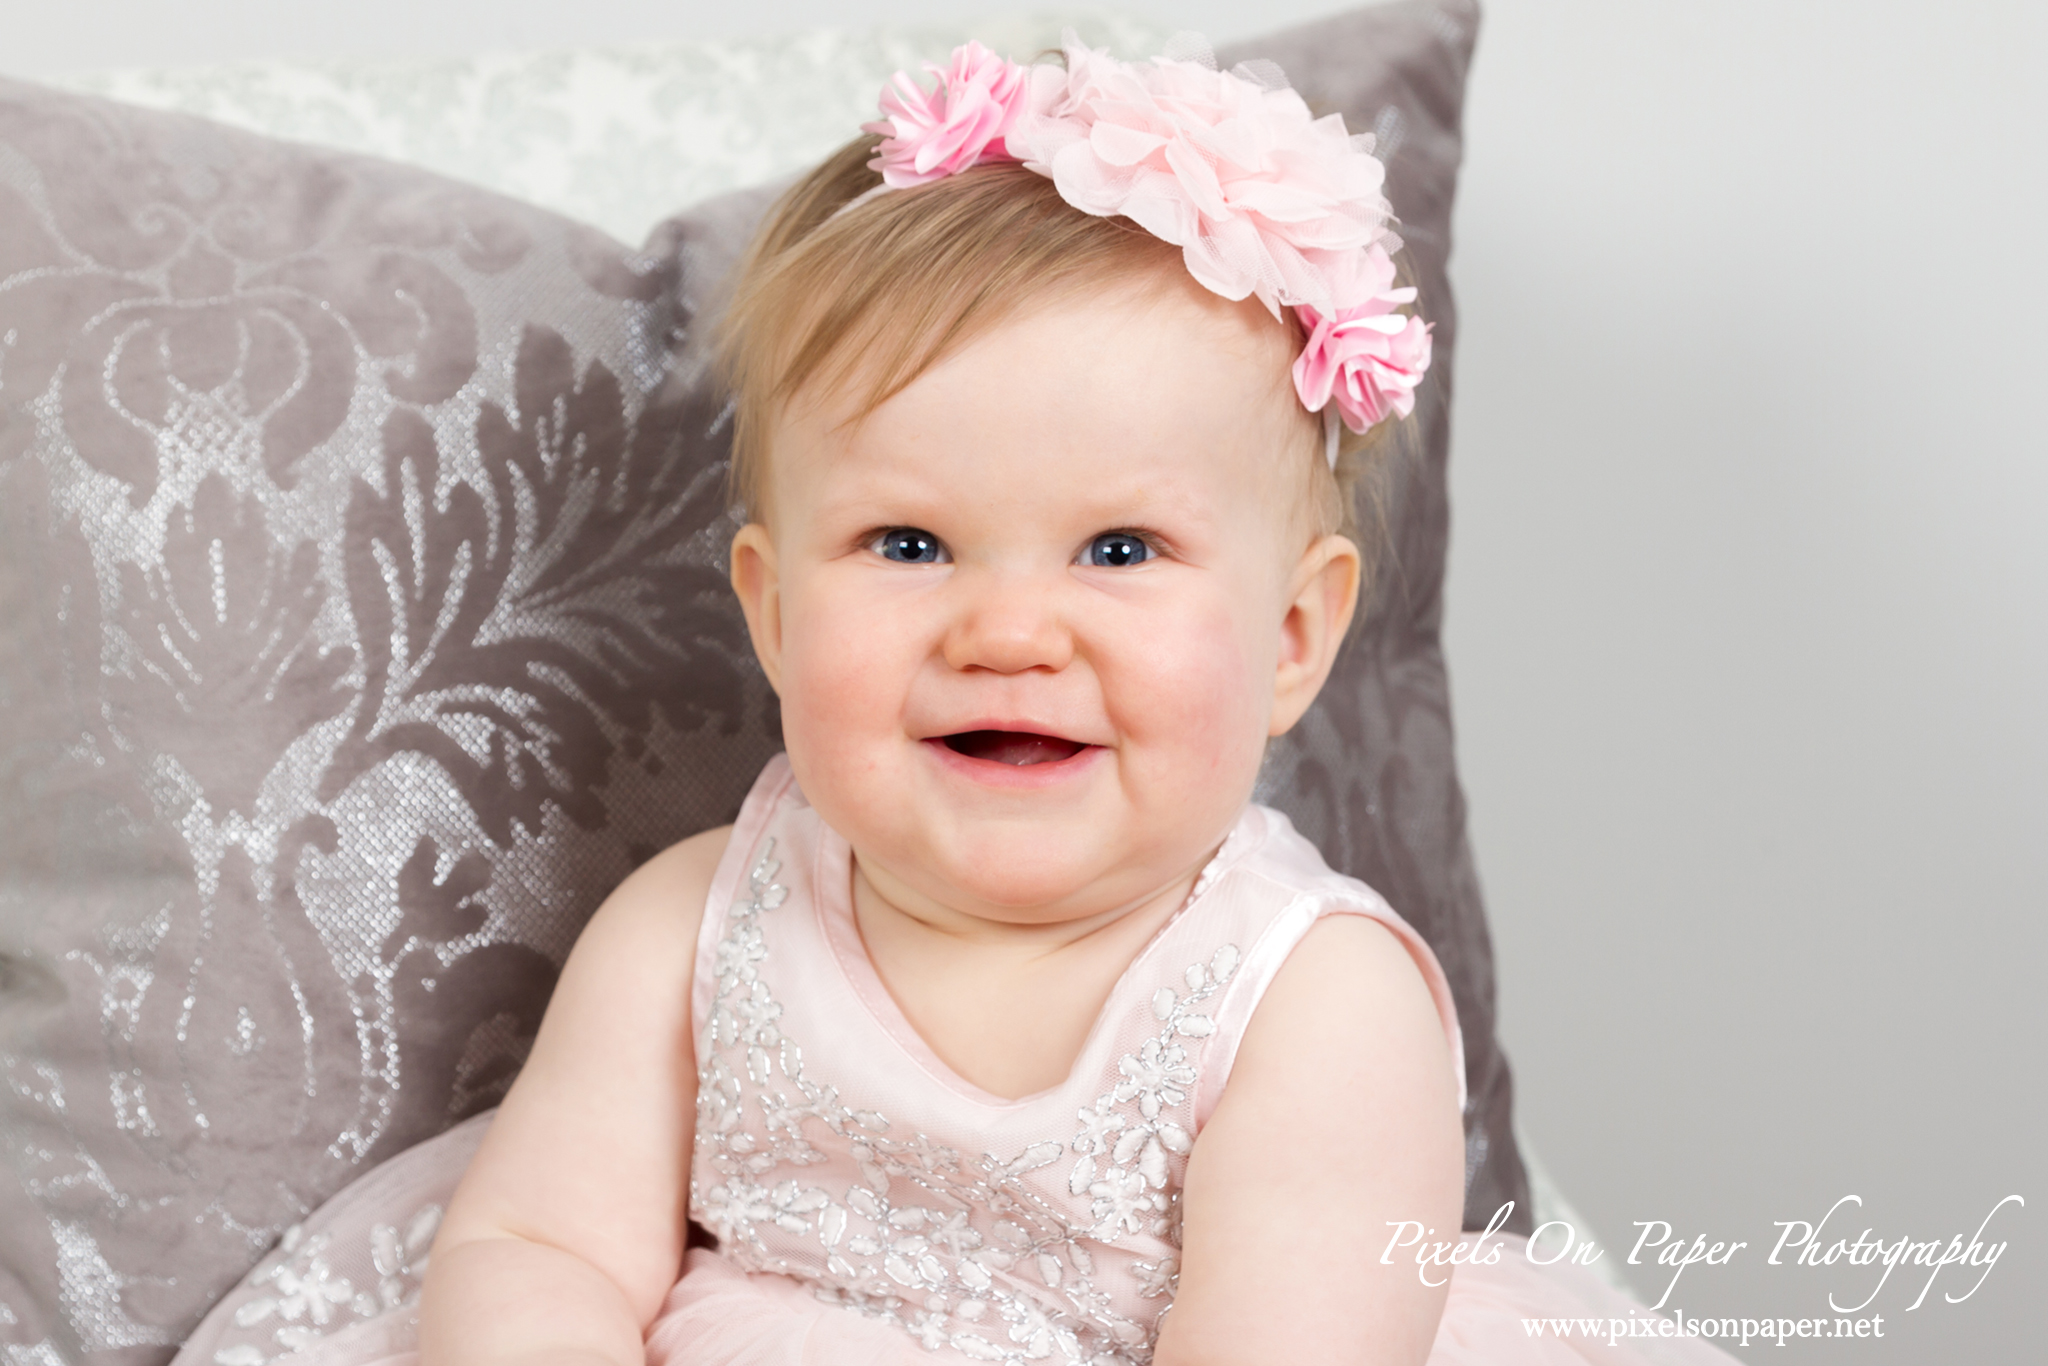 Marion one year old portrait photography photo